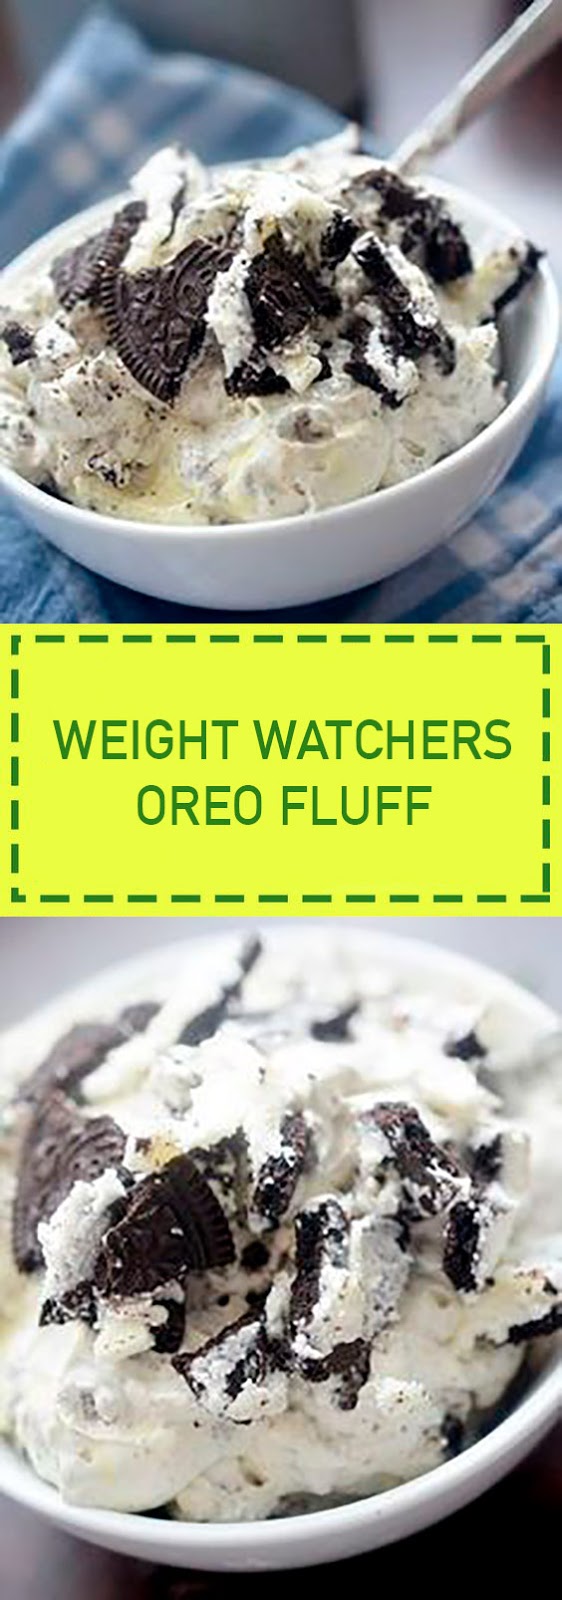 Weight Whatchers Oreo Fluff Recipes - Home Inspiration and ...